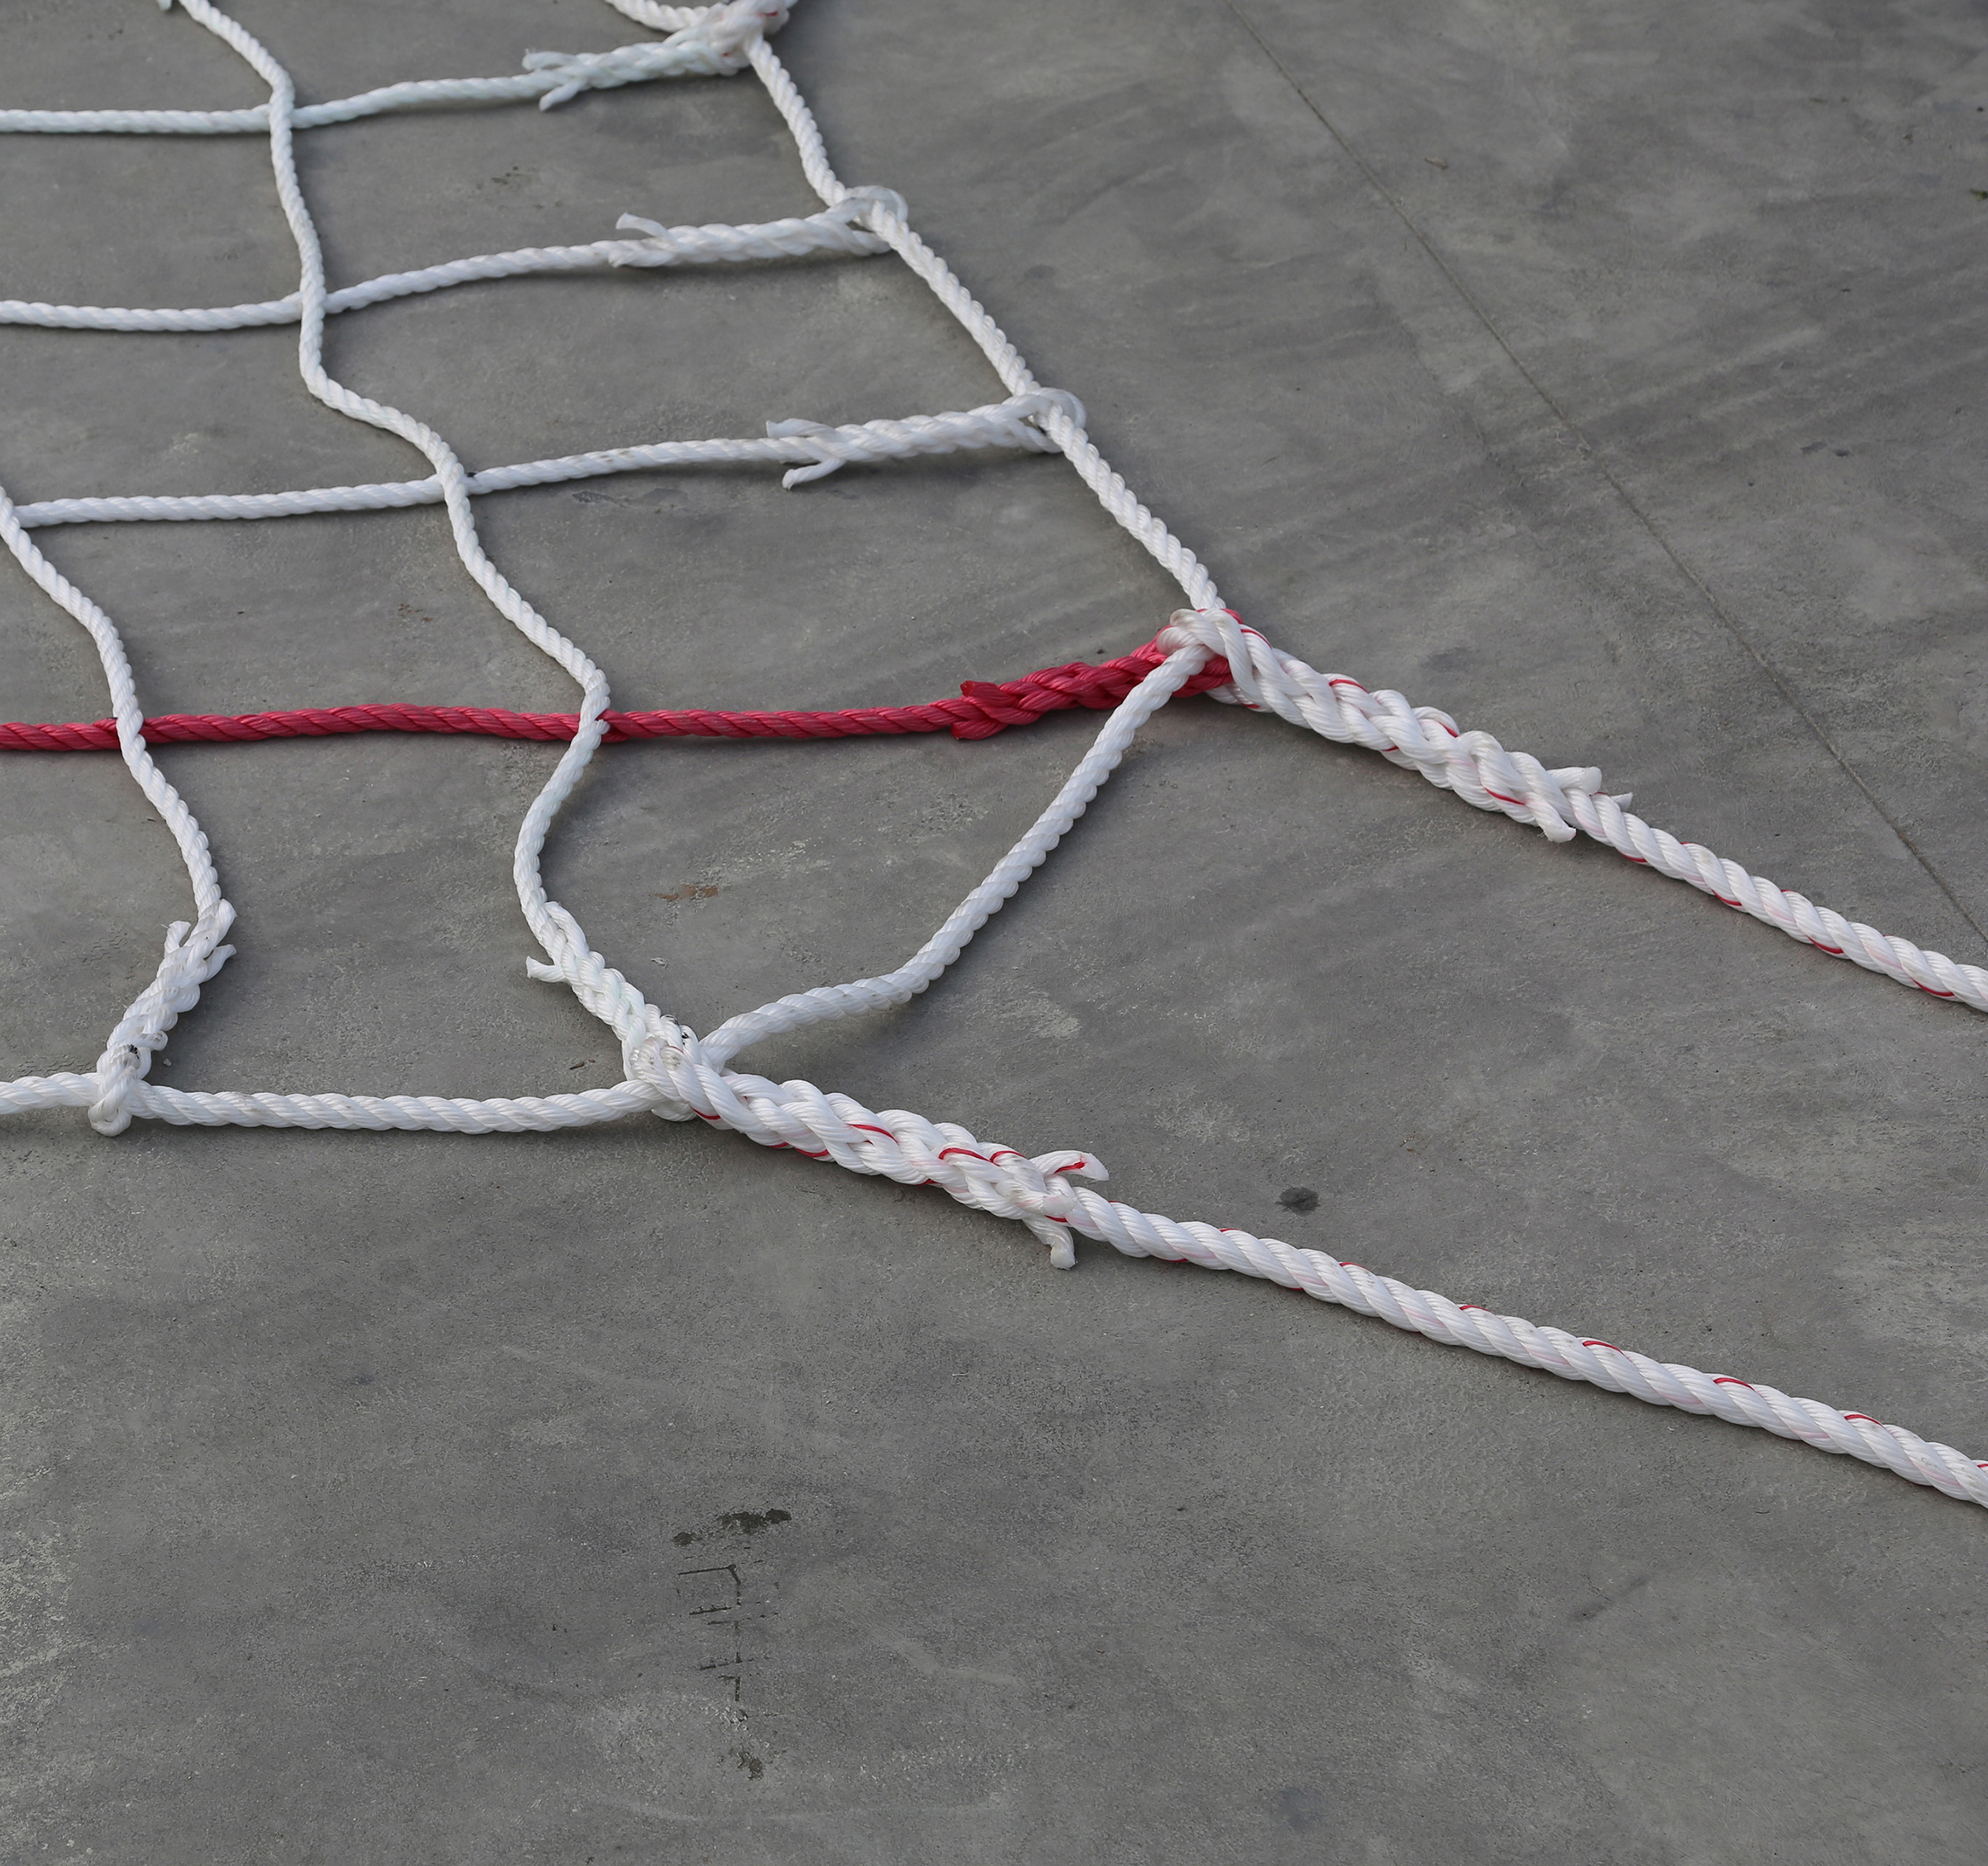 Web sling made of 3 strands pp or pe ropes